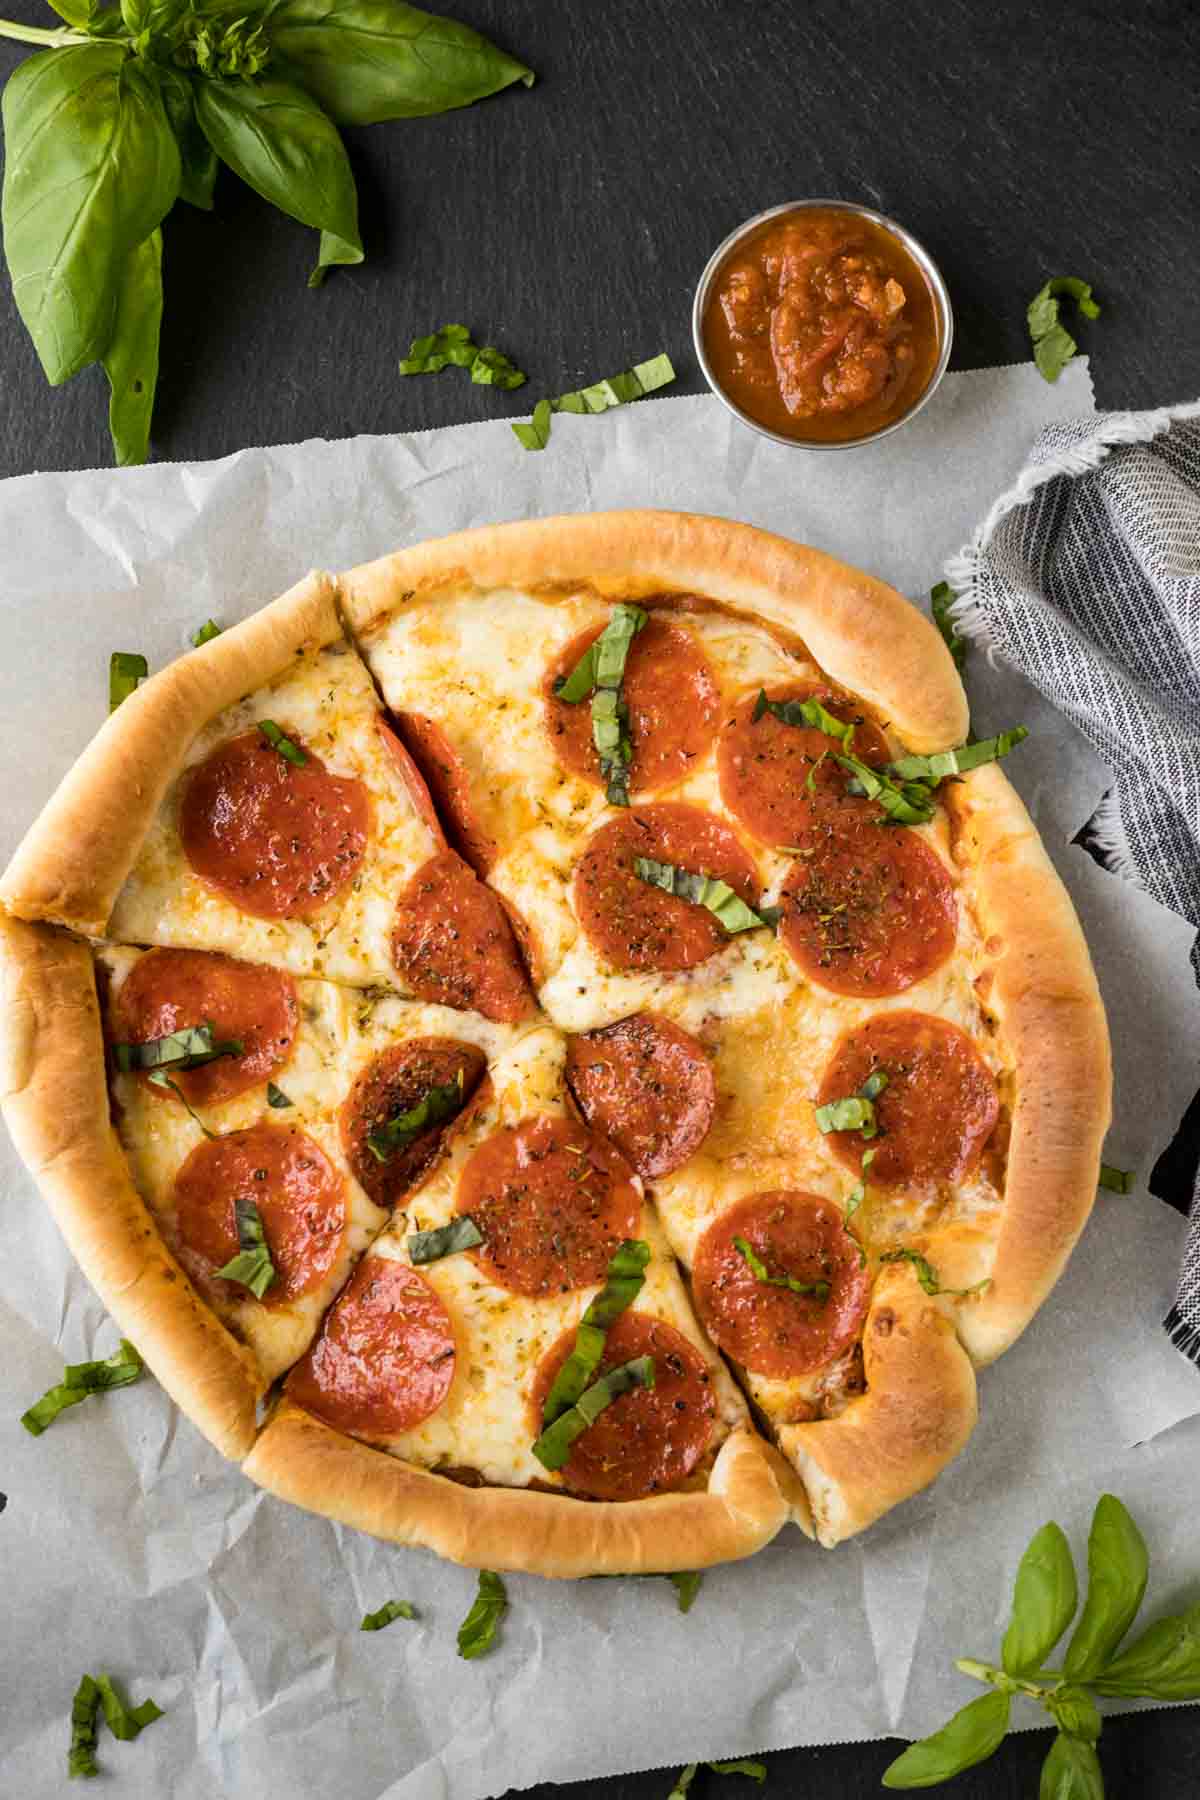 Pepperoni pizza made in a skillet.